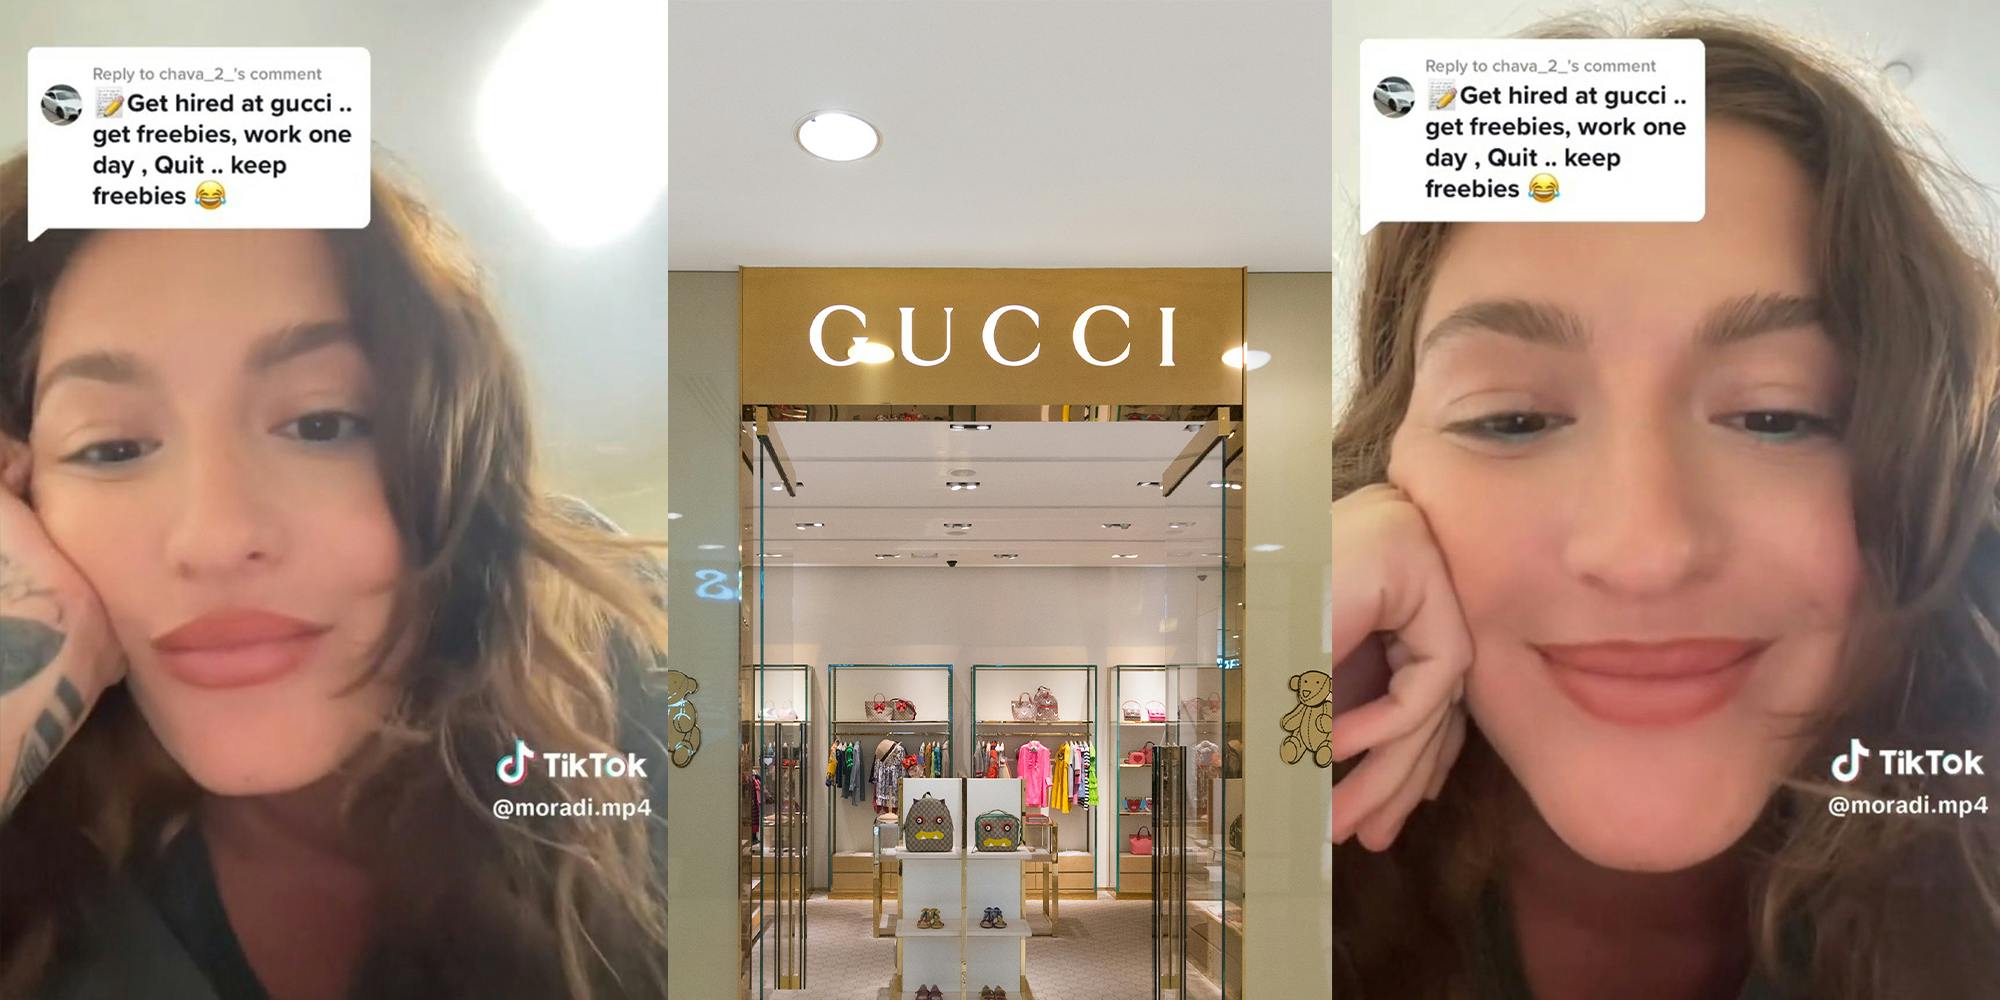 Gucci Store worker says store doesn't let you keep 'freebies'